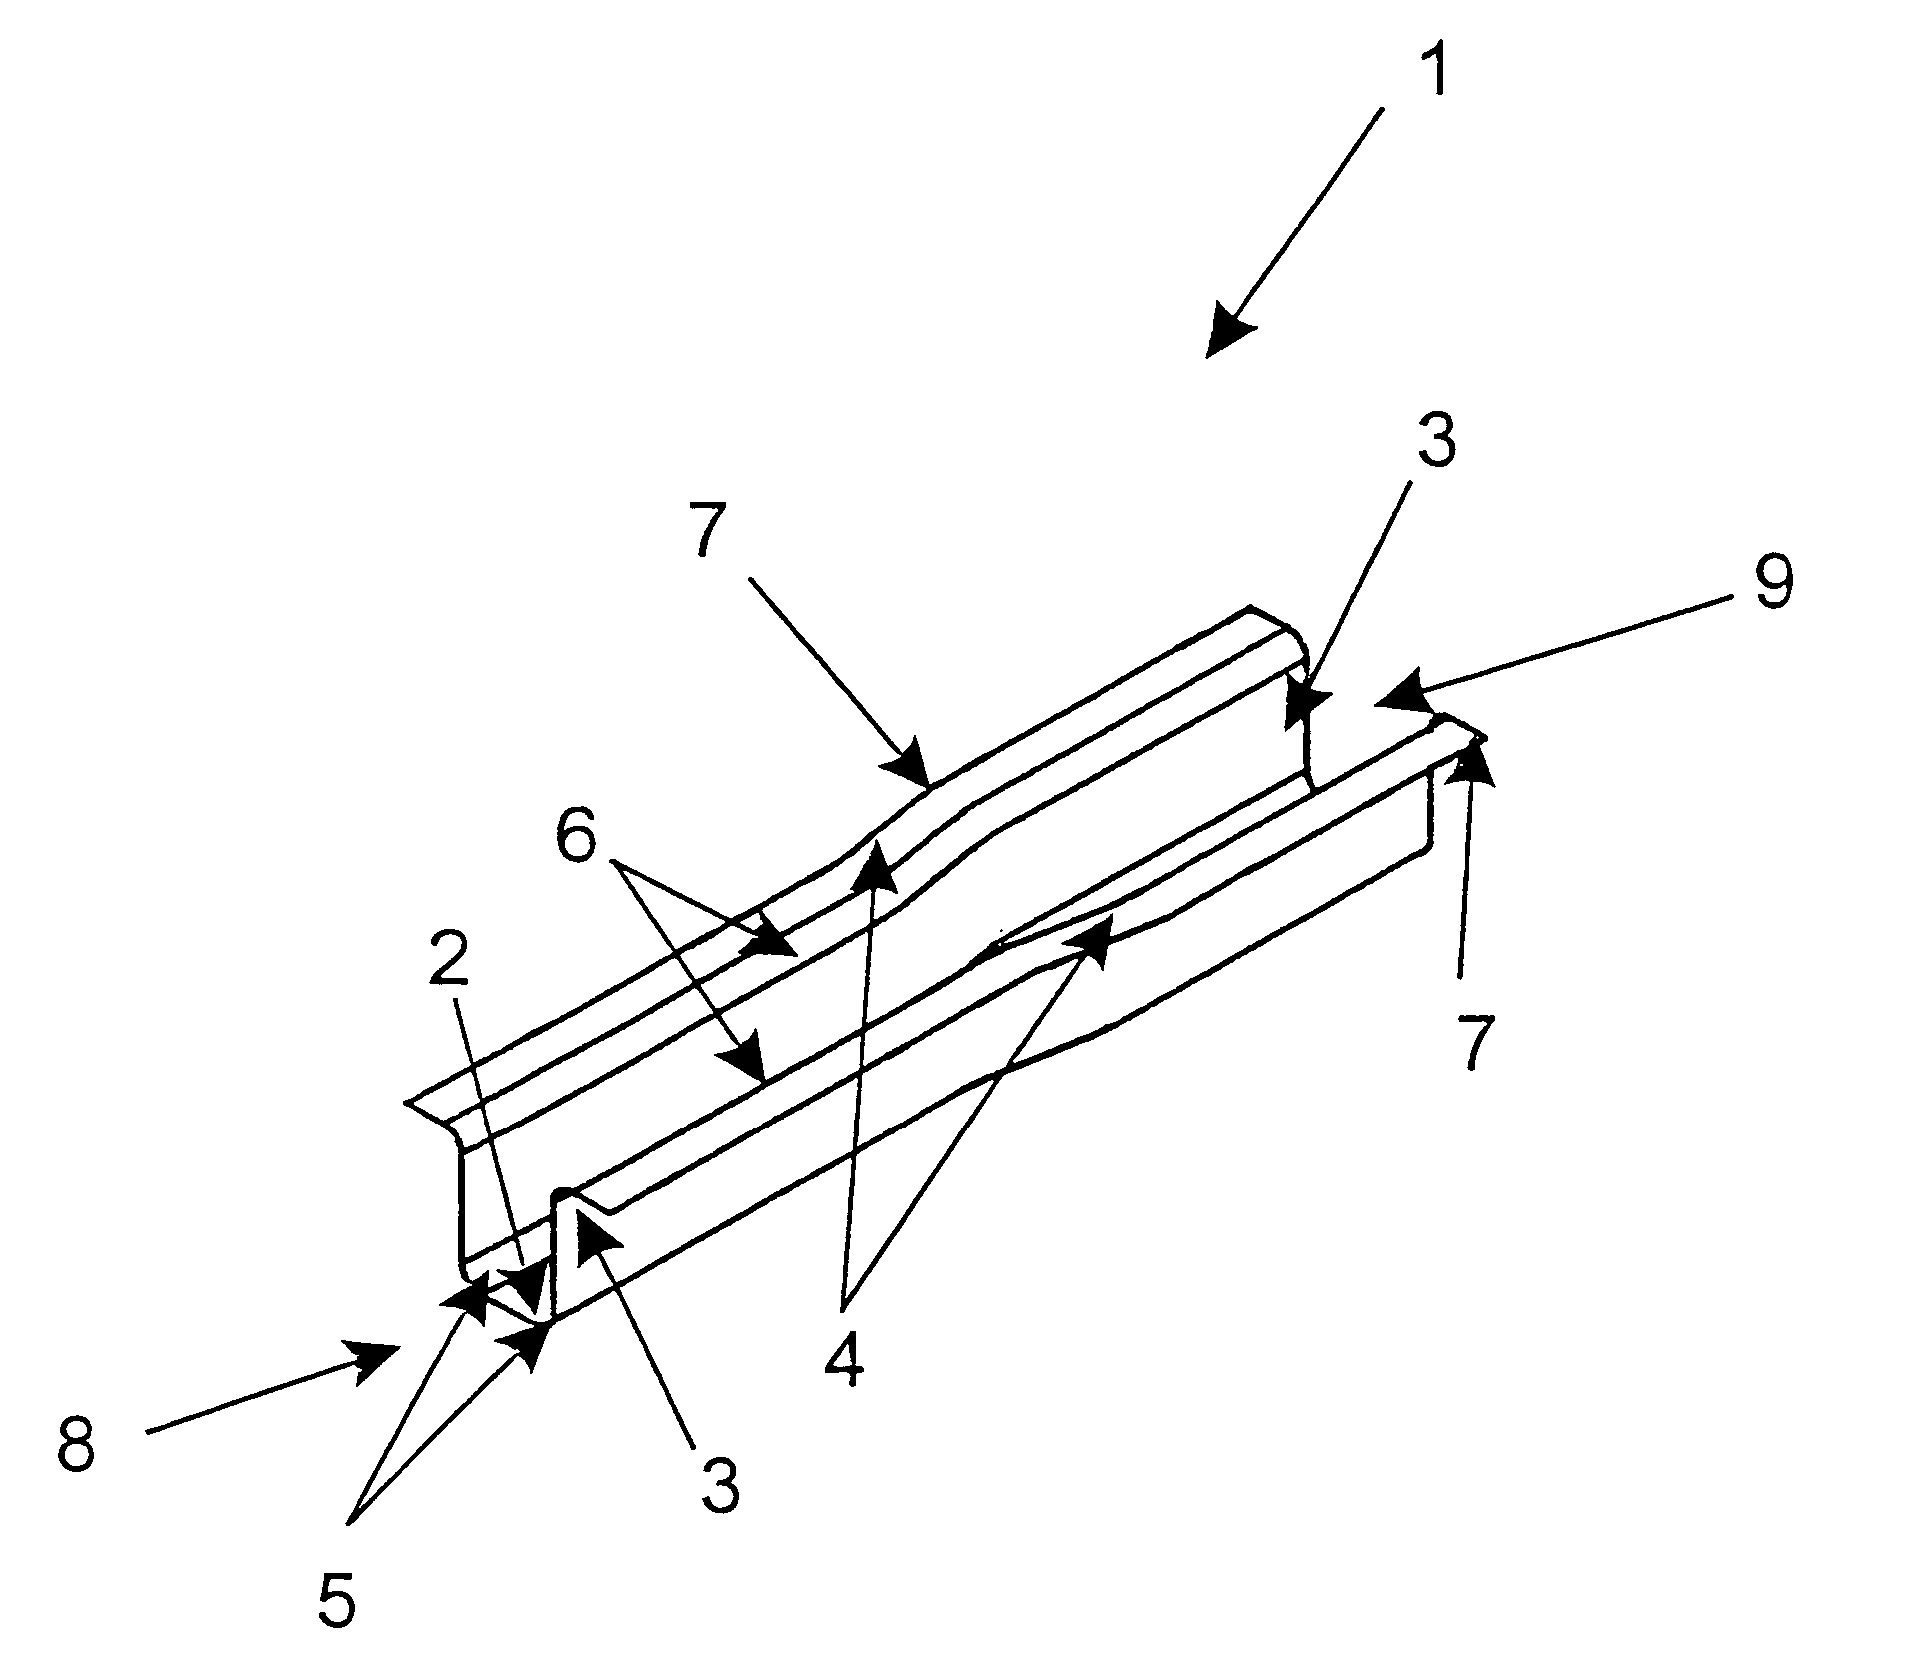 Construction component with a longitudinally changing cross-section shape